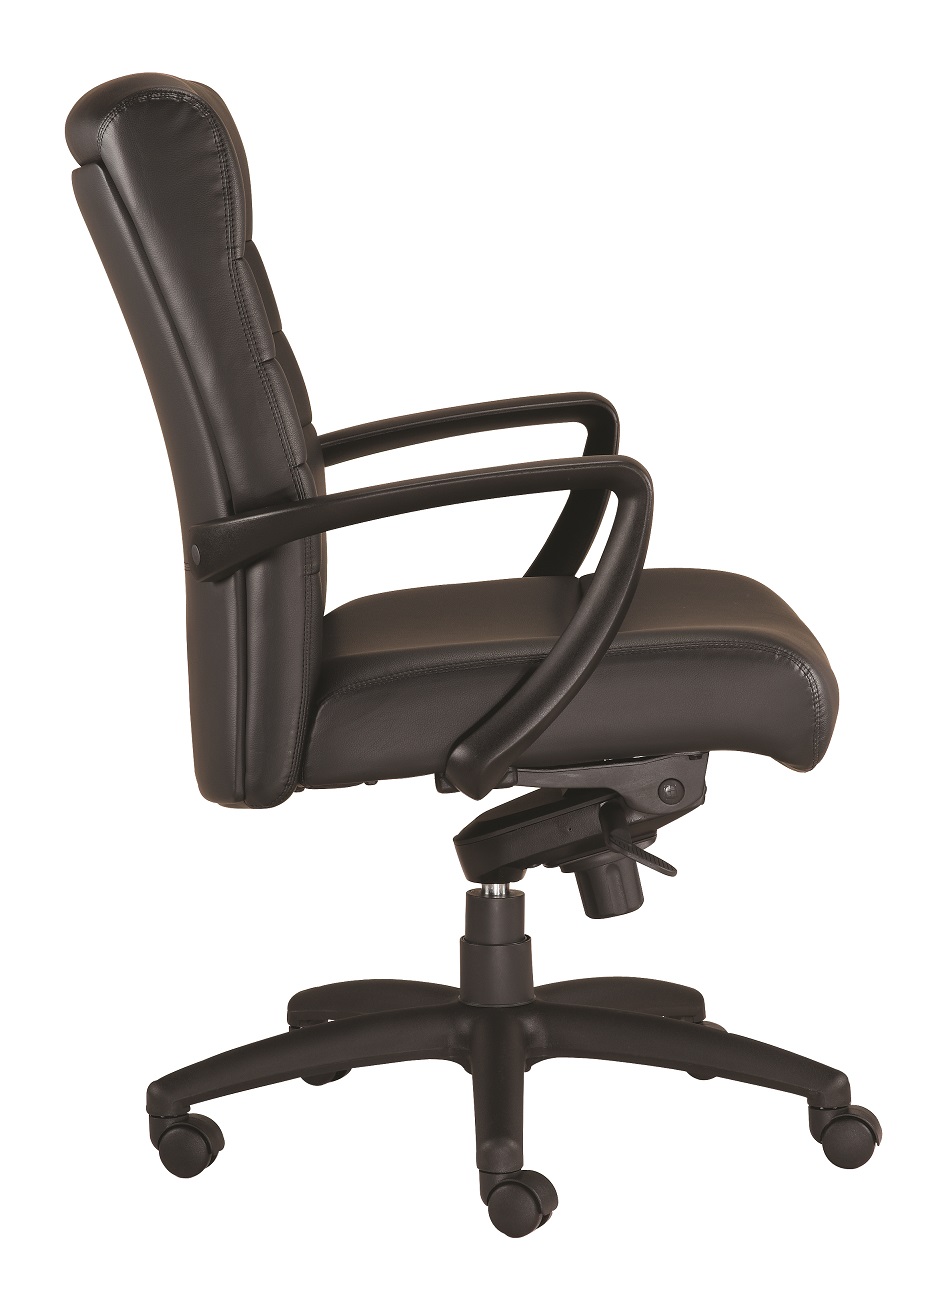 Black Adjustable Swivel Faux Leather Rolling Office Chair-372378-1